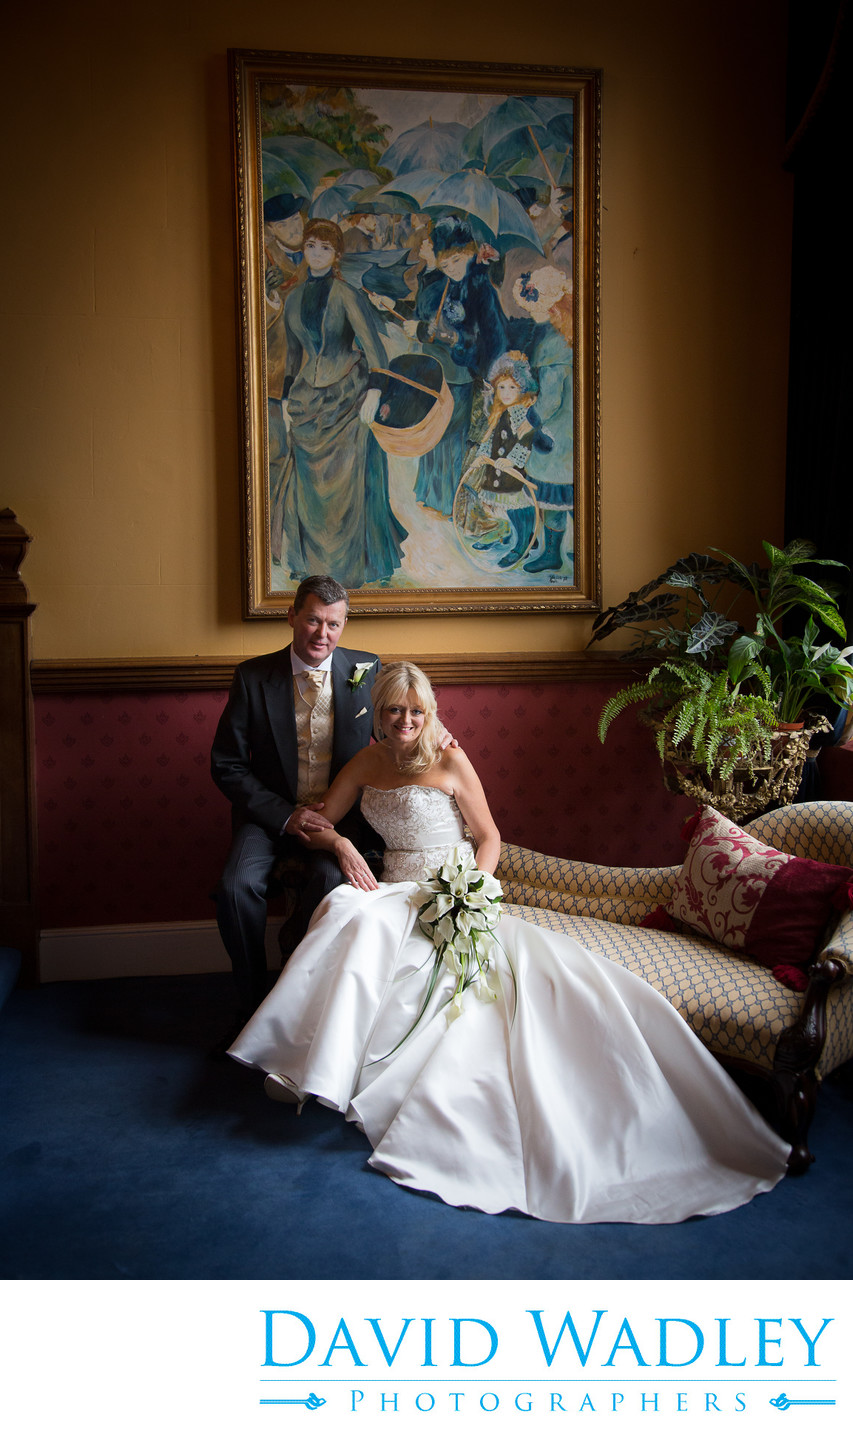 Bride & Groom together at Grafton Manor on wedding day.